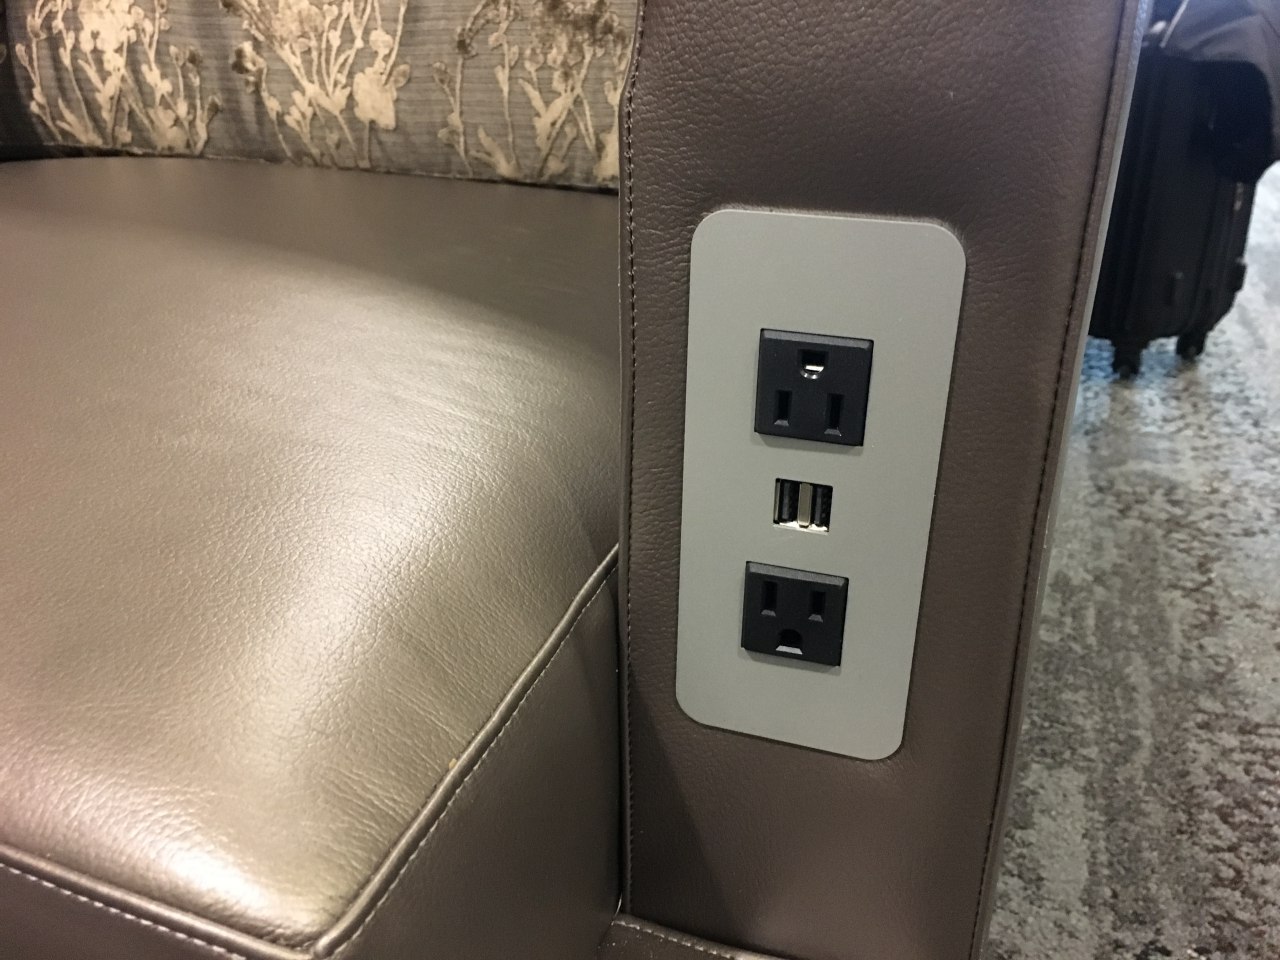 Delta Sky Club JFK Review-Power Outlets by Chair